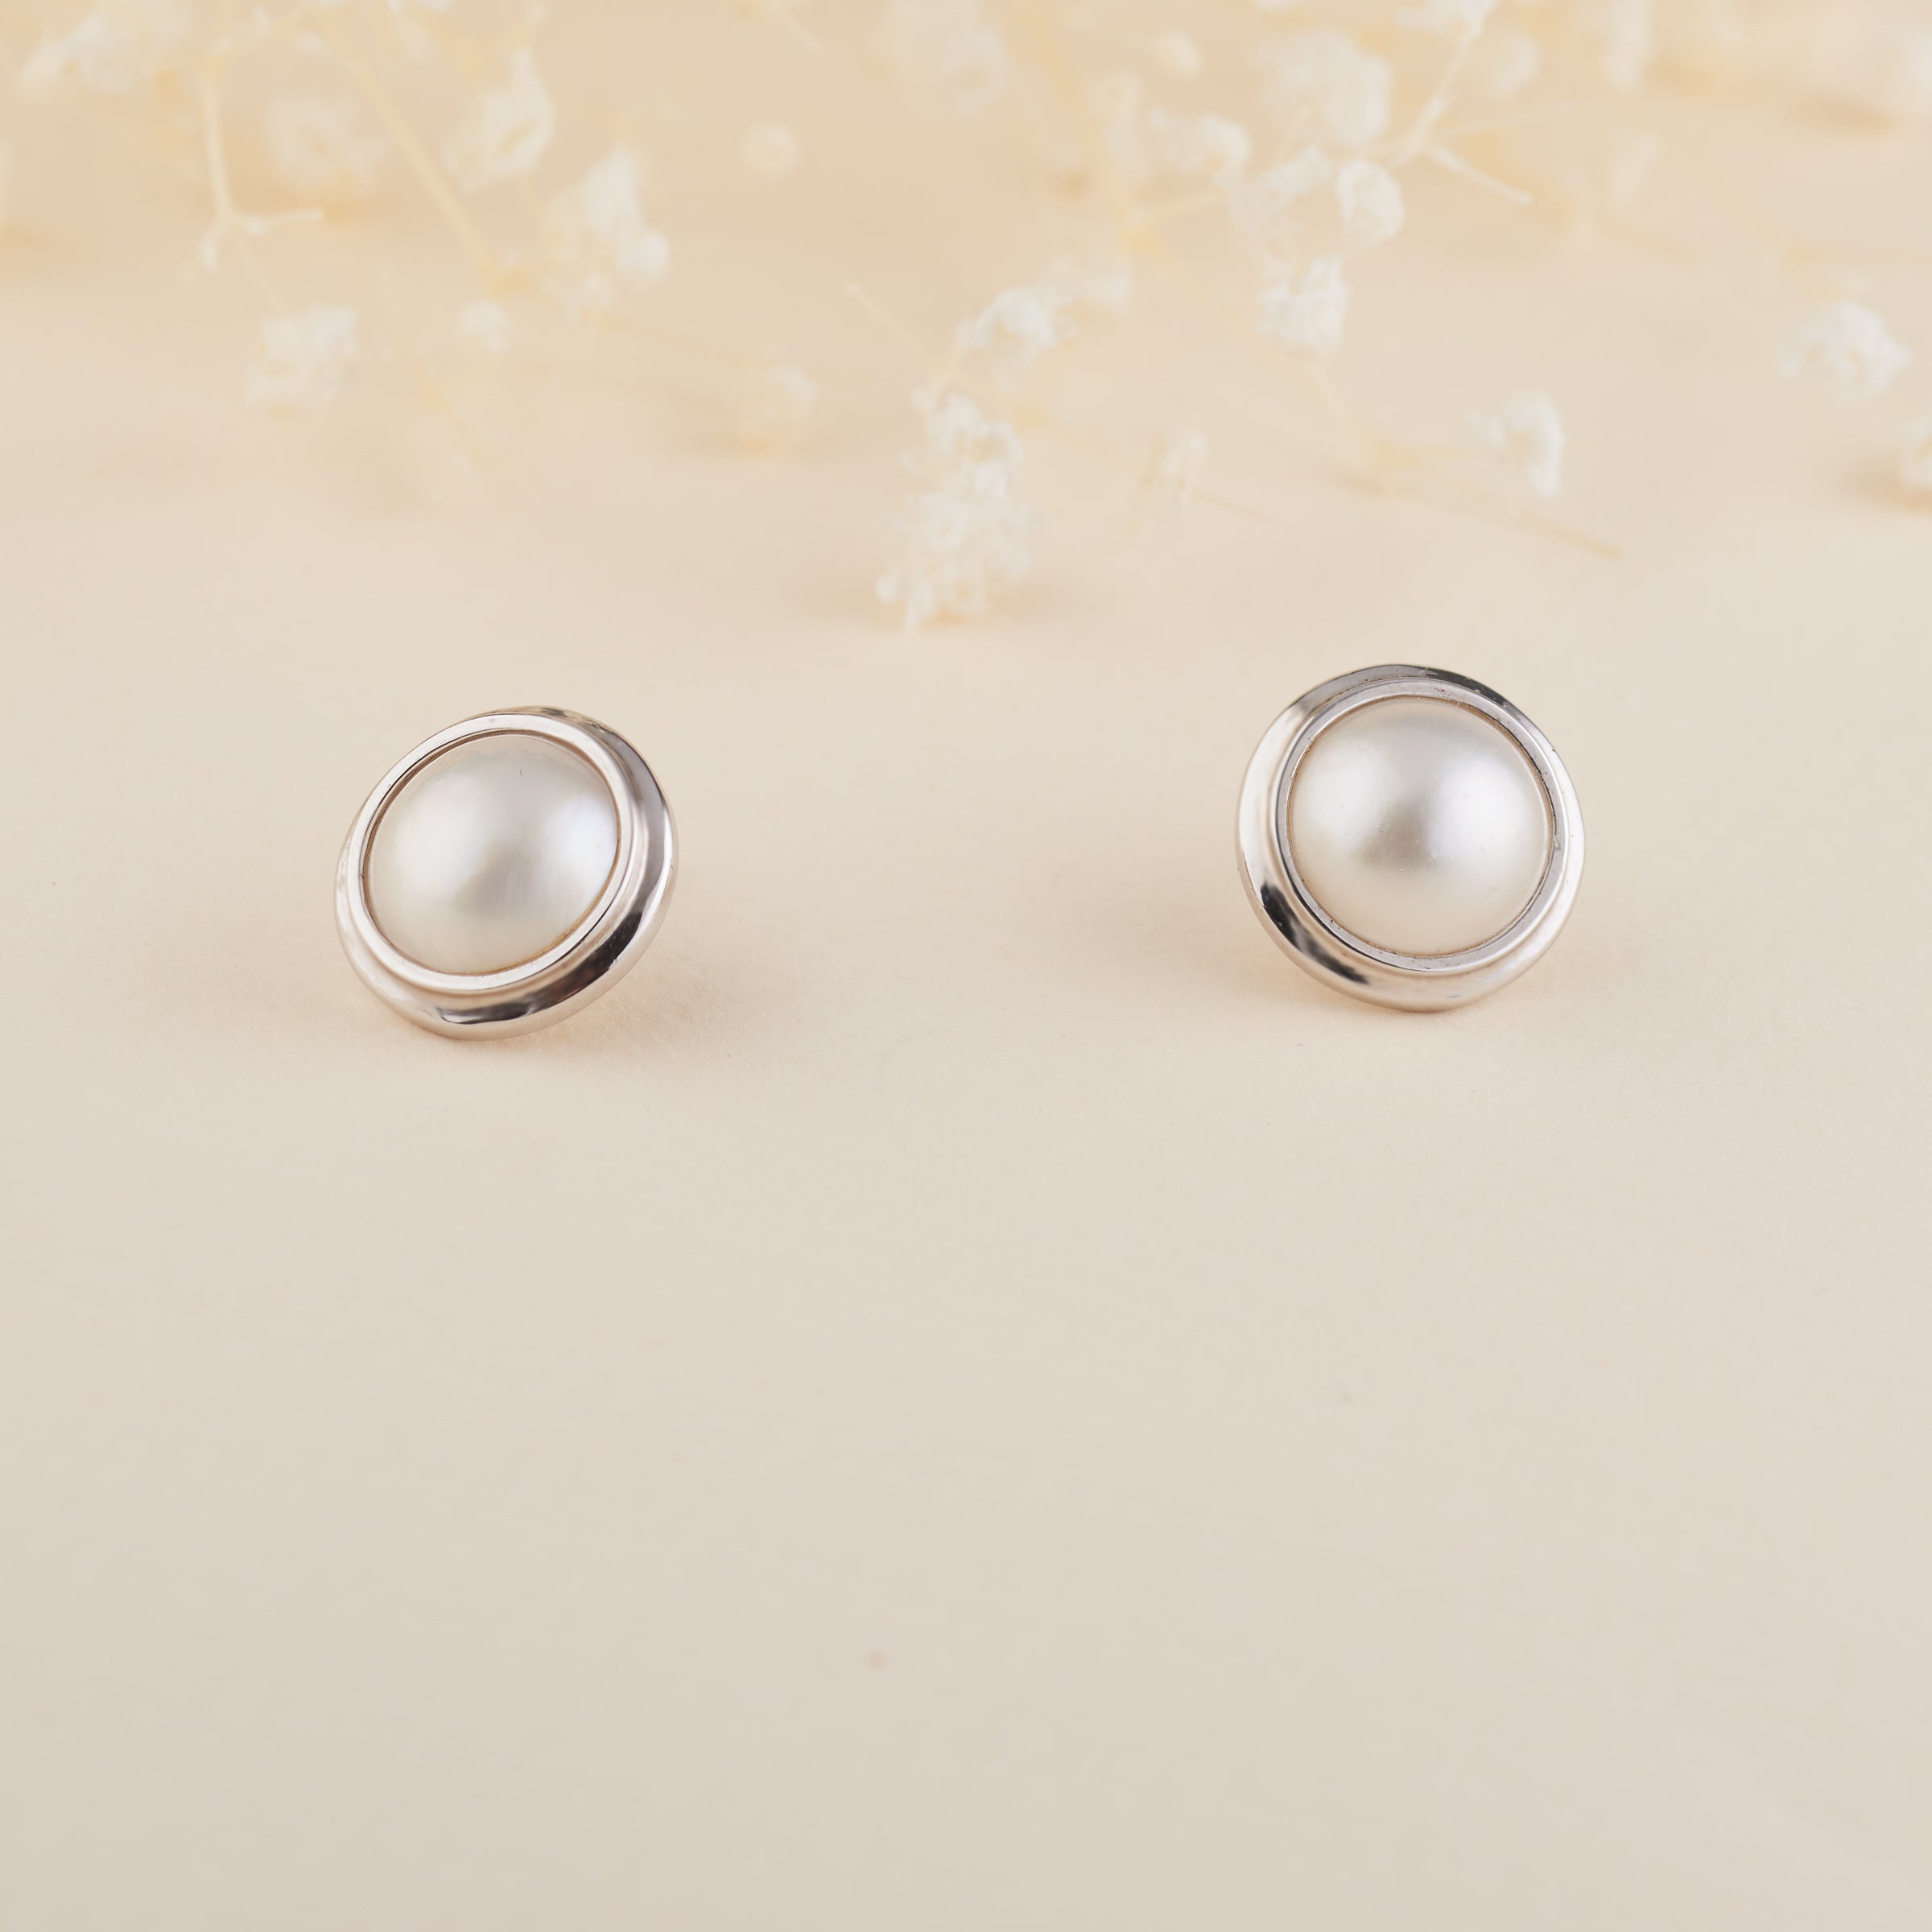 Domed stud earrings with brushed finish  sterling silver  Georgina Dunn  Jewellery